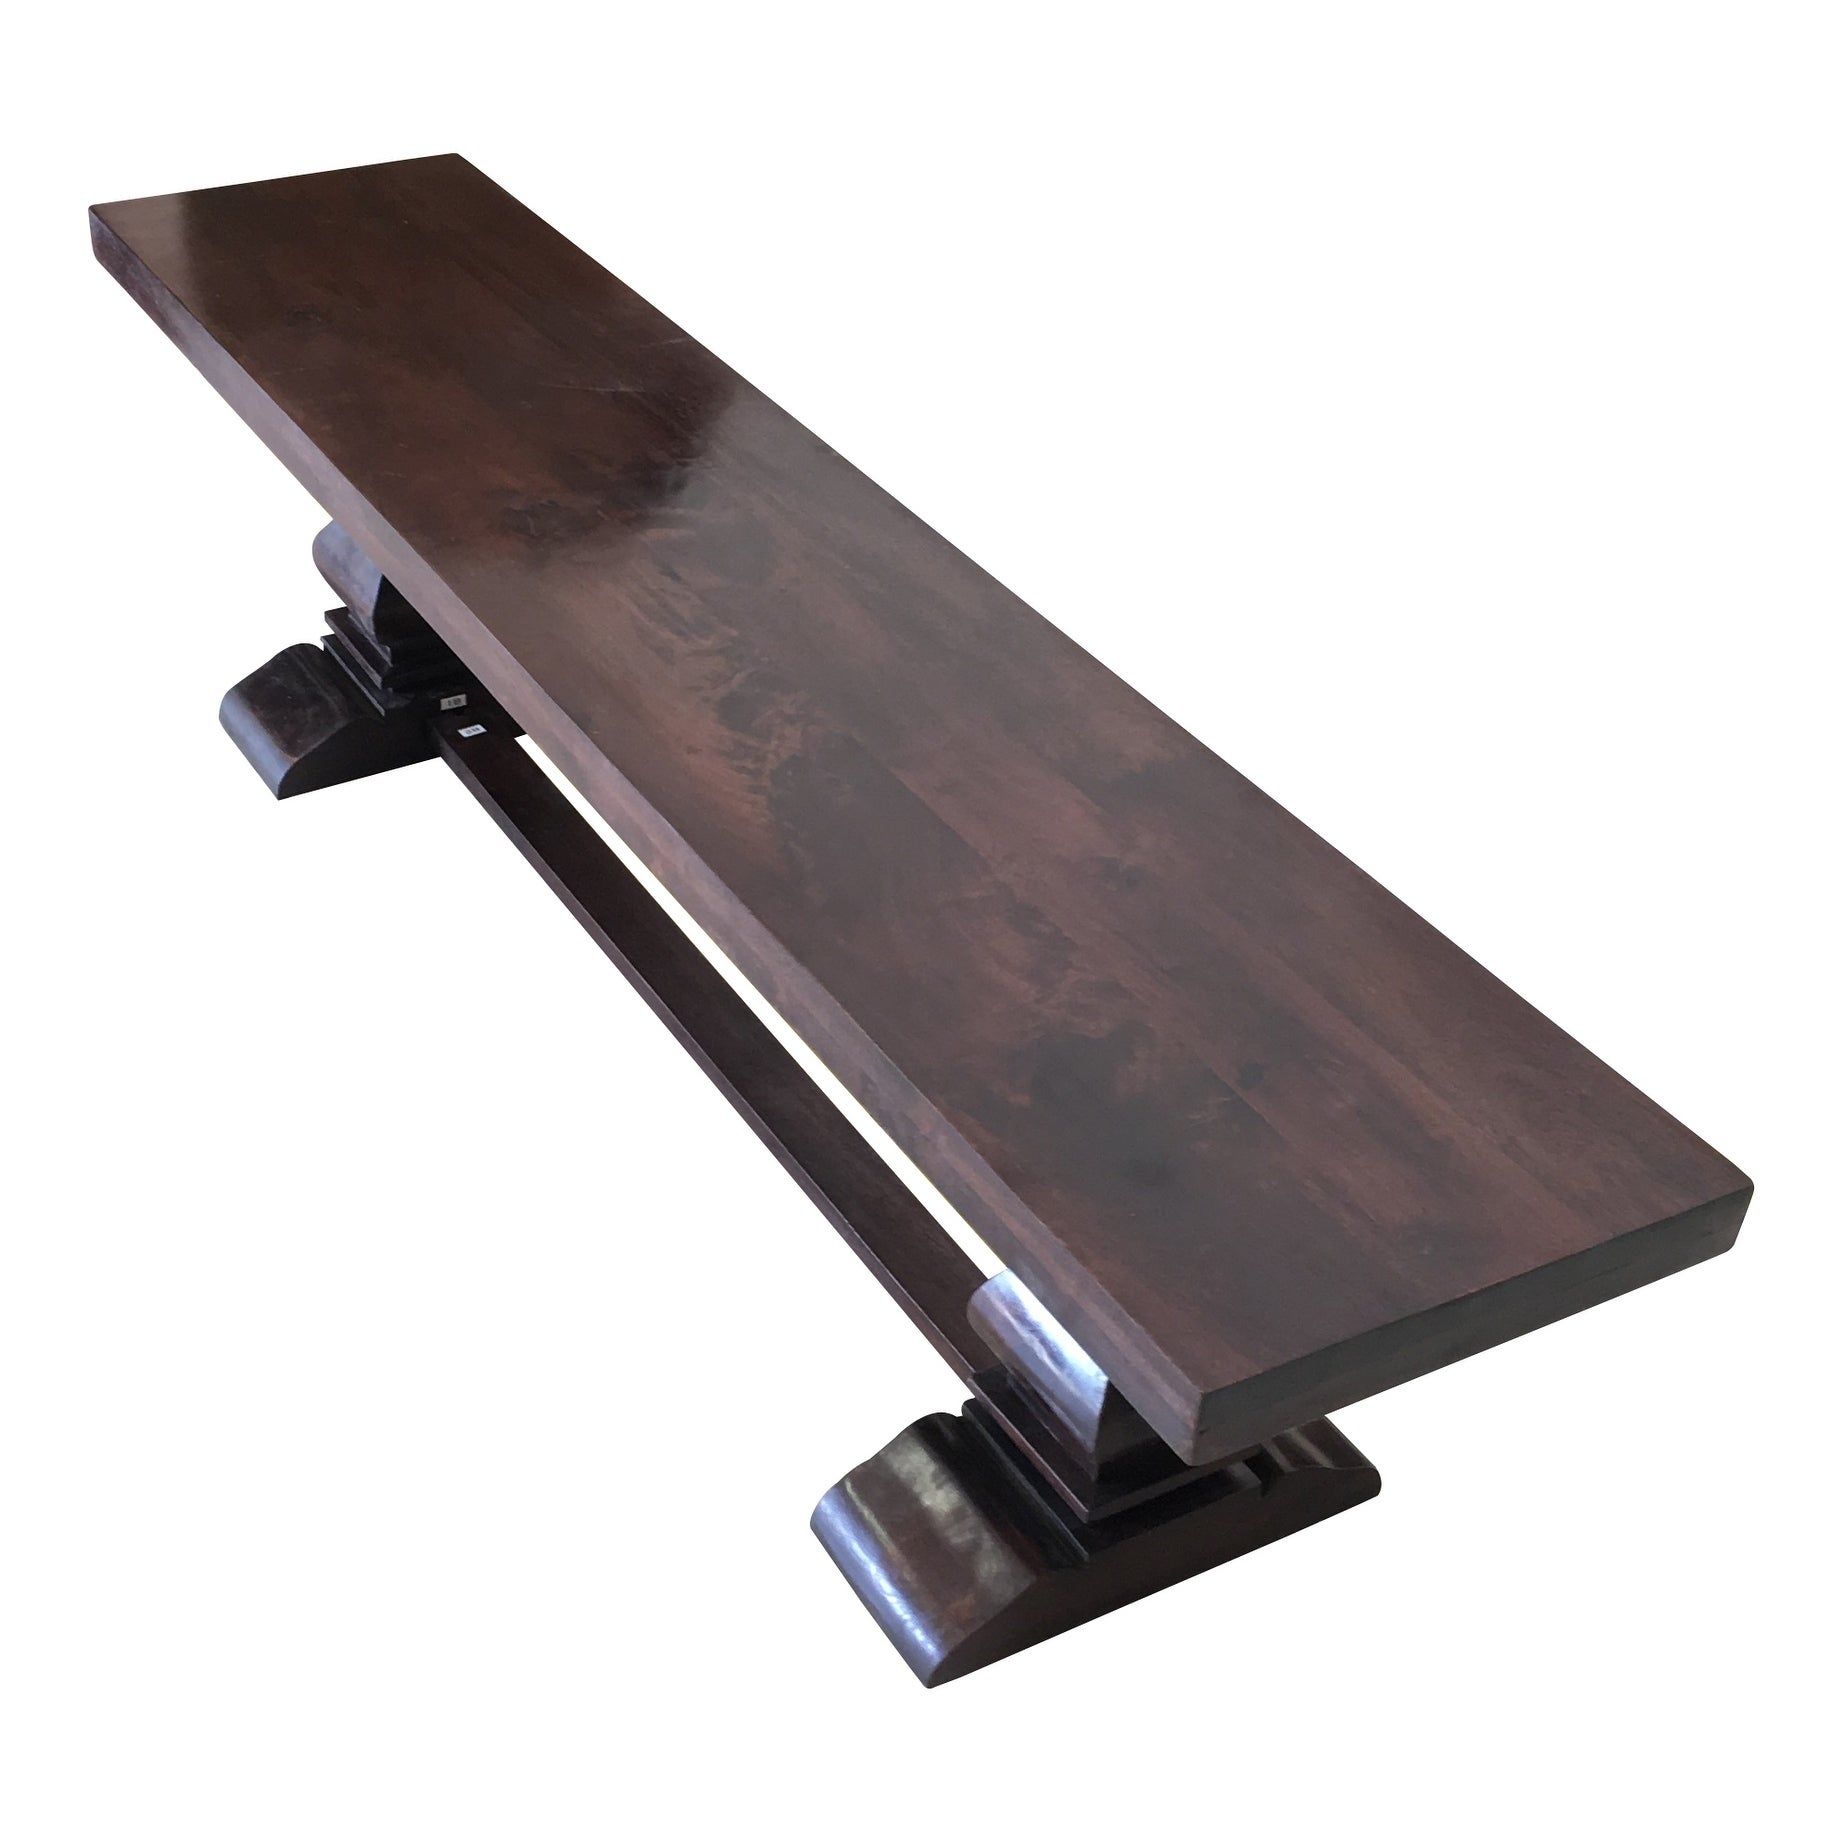 Maliyah Pedestal Wood Bench – 18'' H X 80'' W X 15'' D Intended For Maliyah Wooden Garden Benches (View 21 of 25)